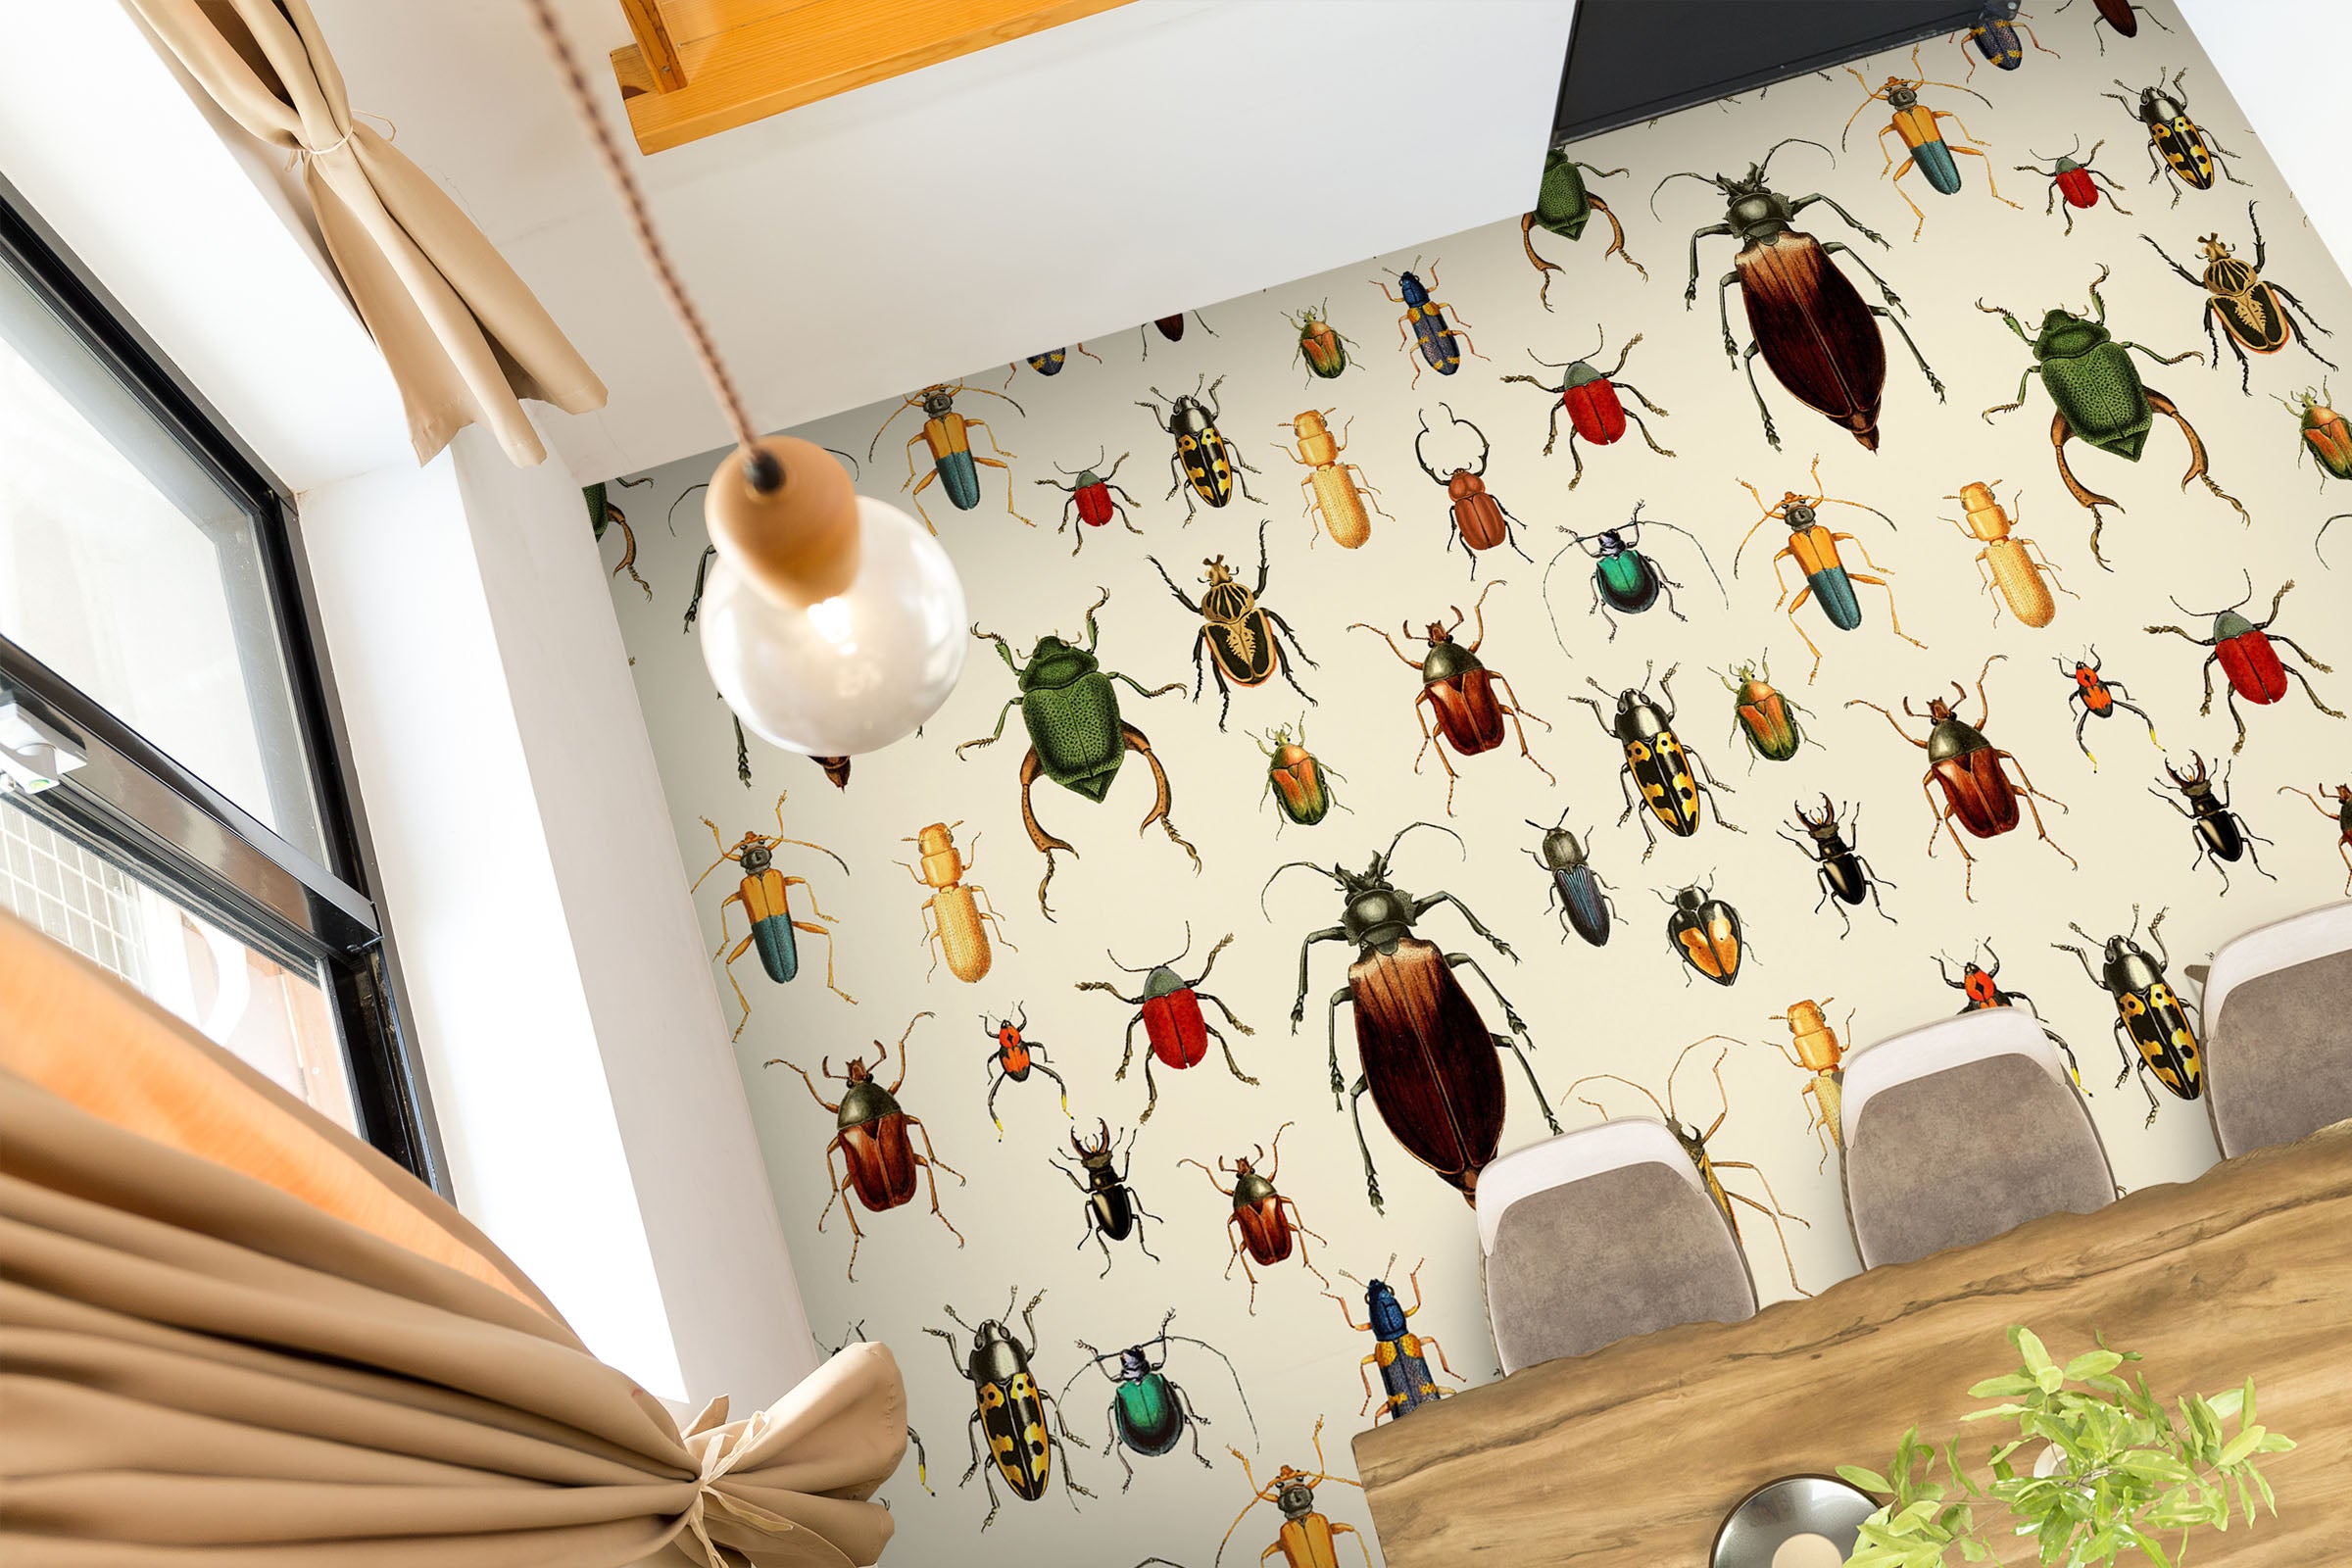 3D Colorful Insects 99224 Uta Naumann Floor Mural  Wallpaper Murals Self-Adhesive Removable Print Epoxy